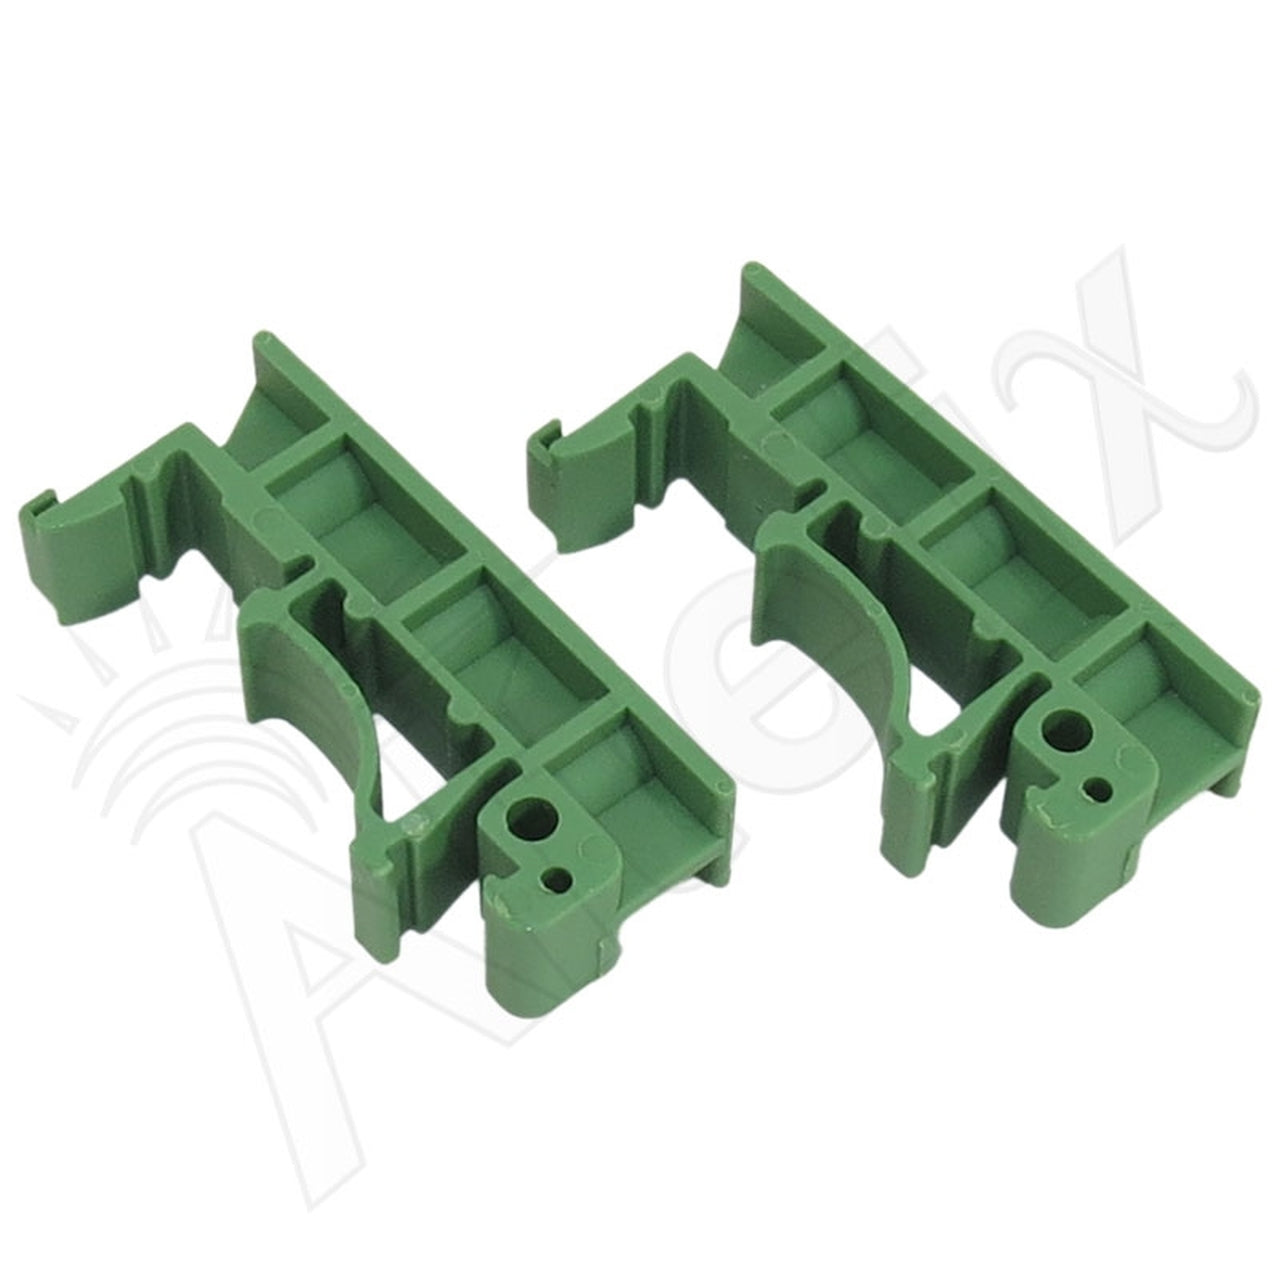 Plastic DIN Rail Mounting Clips 35mm Top Hat or 32mm G-Rail-2